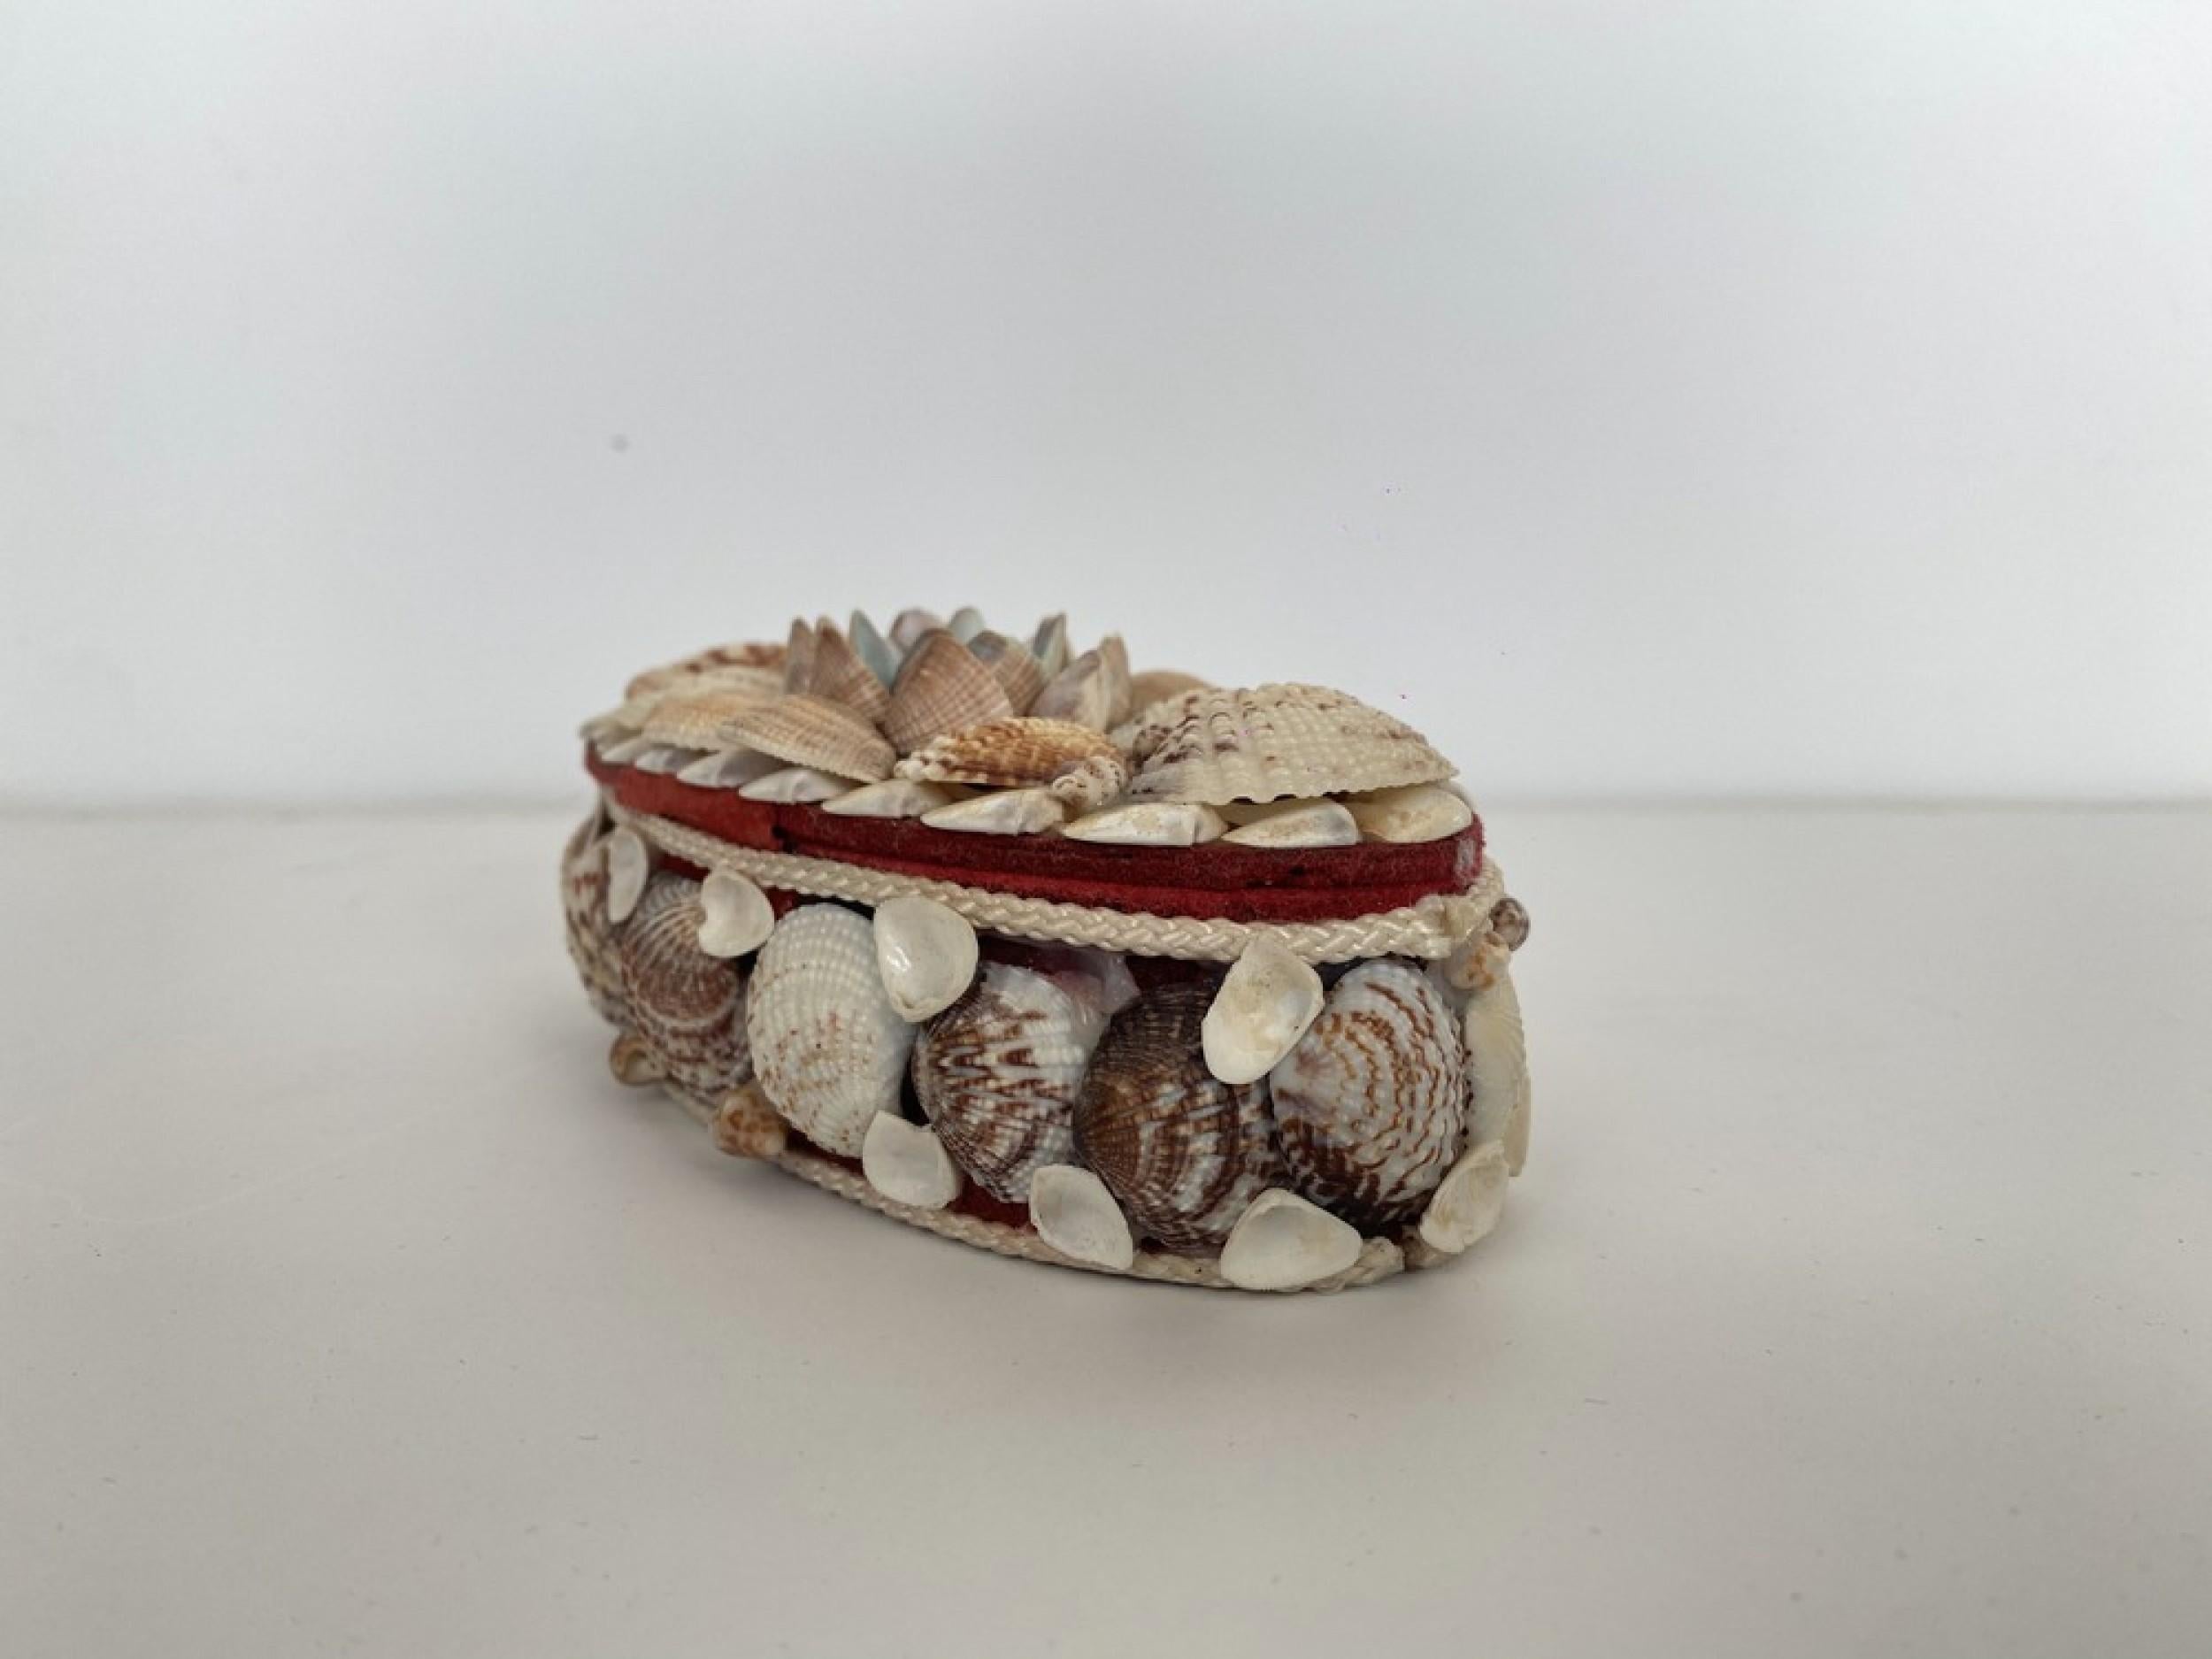 Contemporary American Modern oval jewelry box with an applied seashell exterior and red velvet interior.